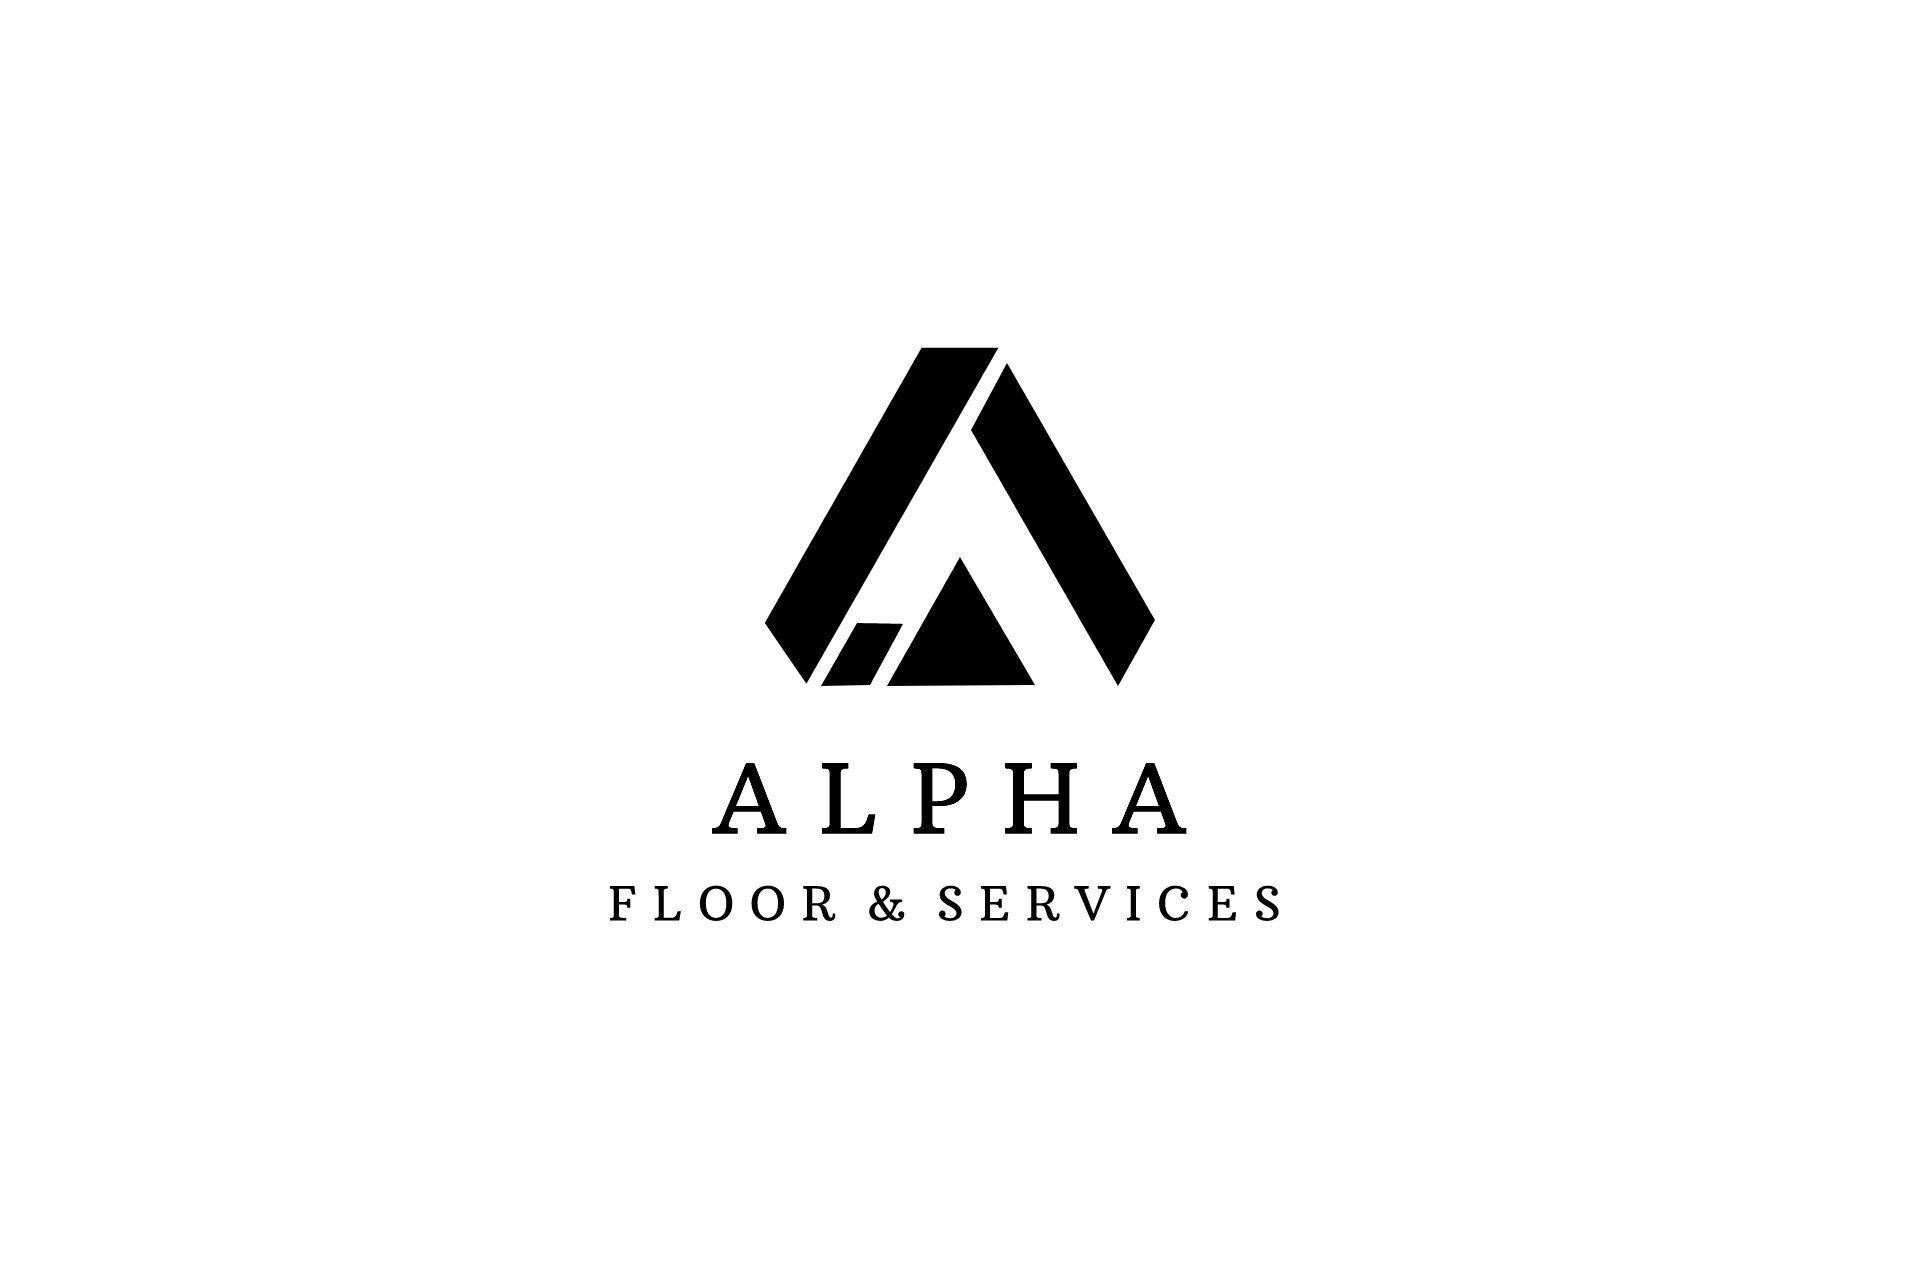 Alpha Floor & Services All kind of Flooring Services